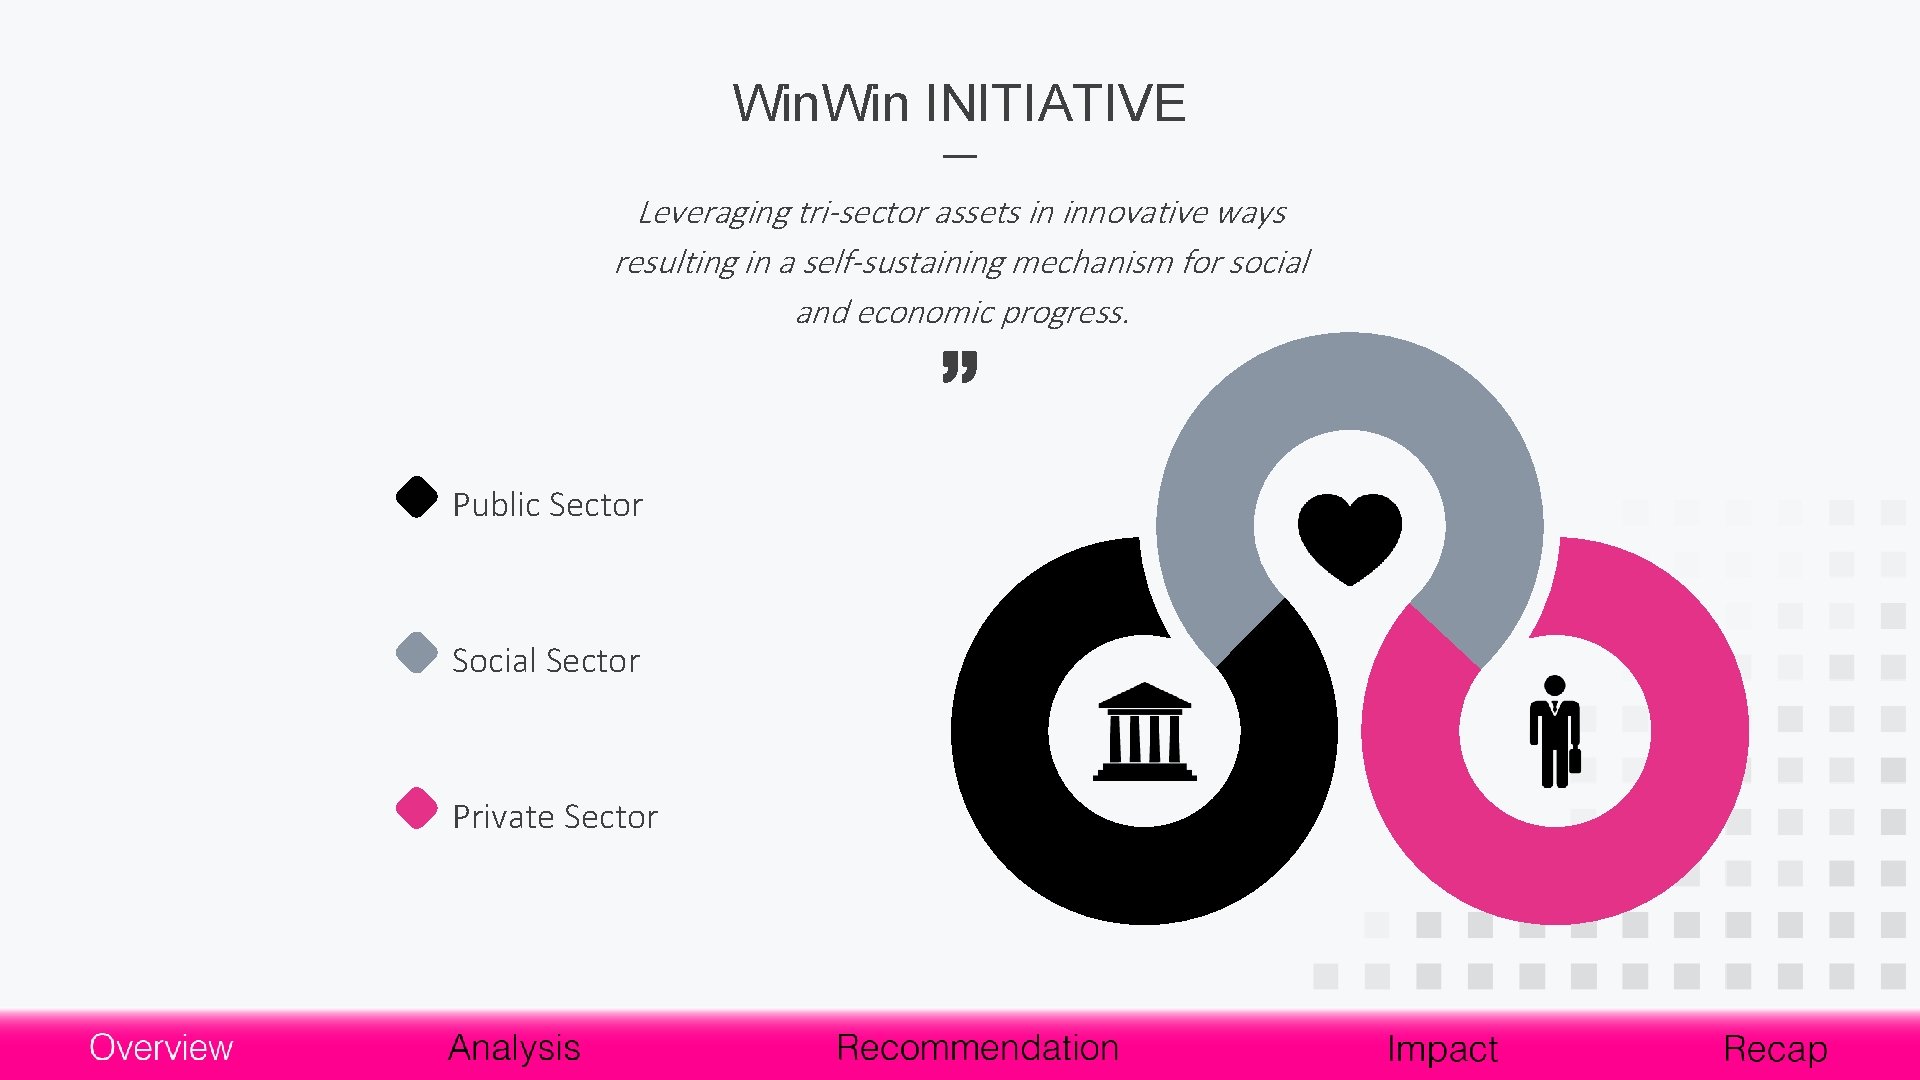 Win. Win INITIATIVE Leveraging tri-sector assets in innovative ways resulting in a self-sustaining mechanism